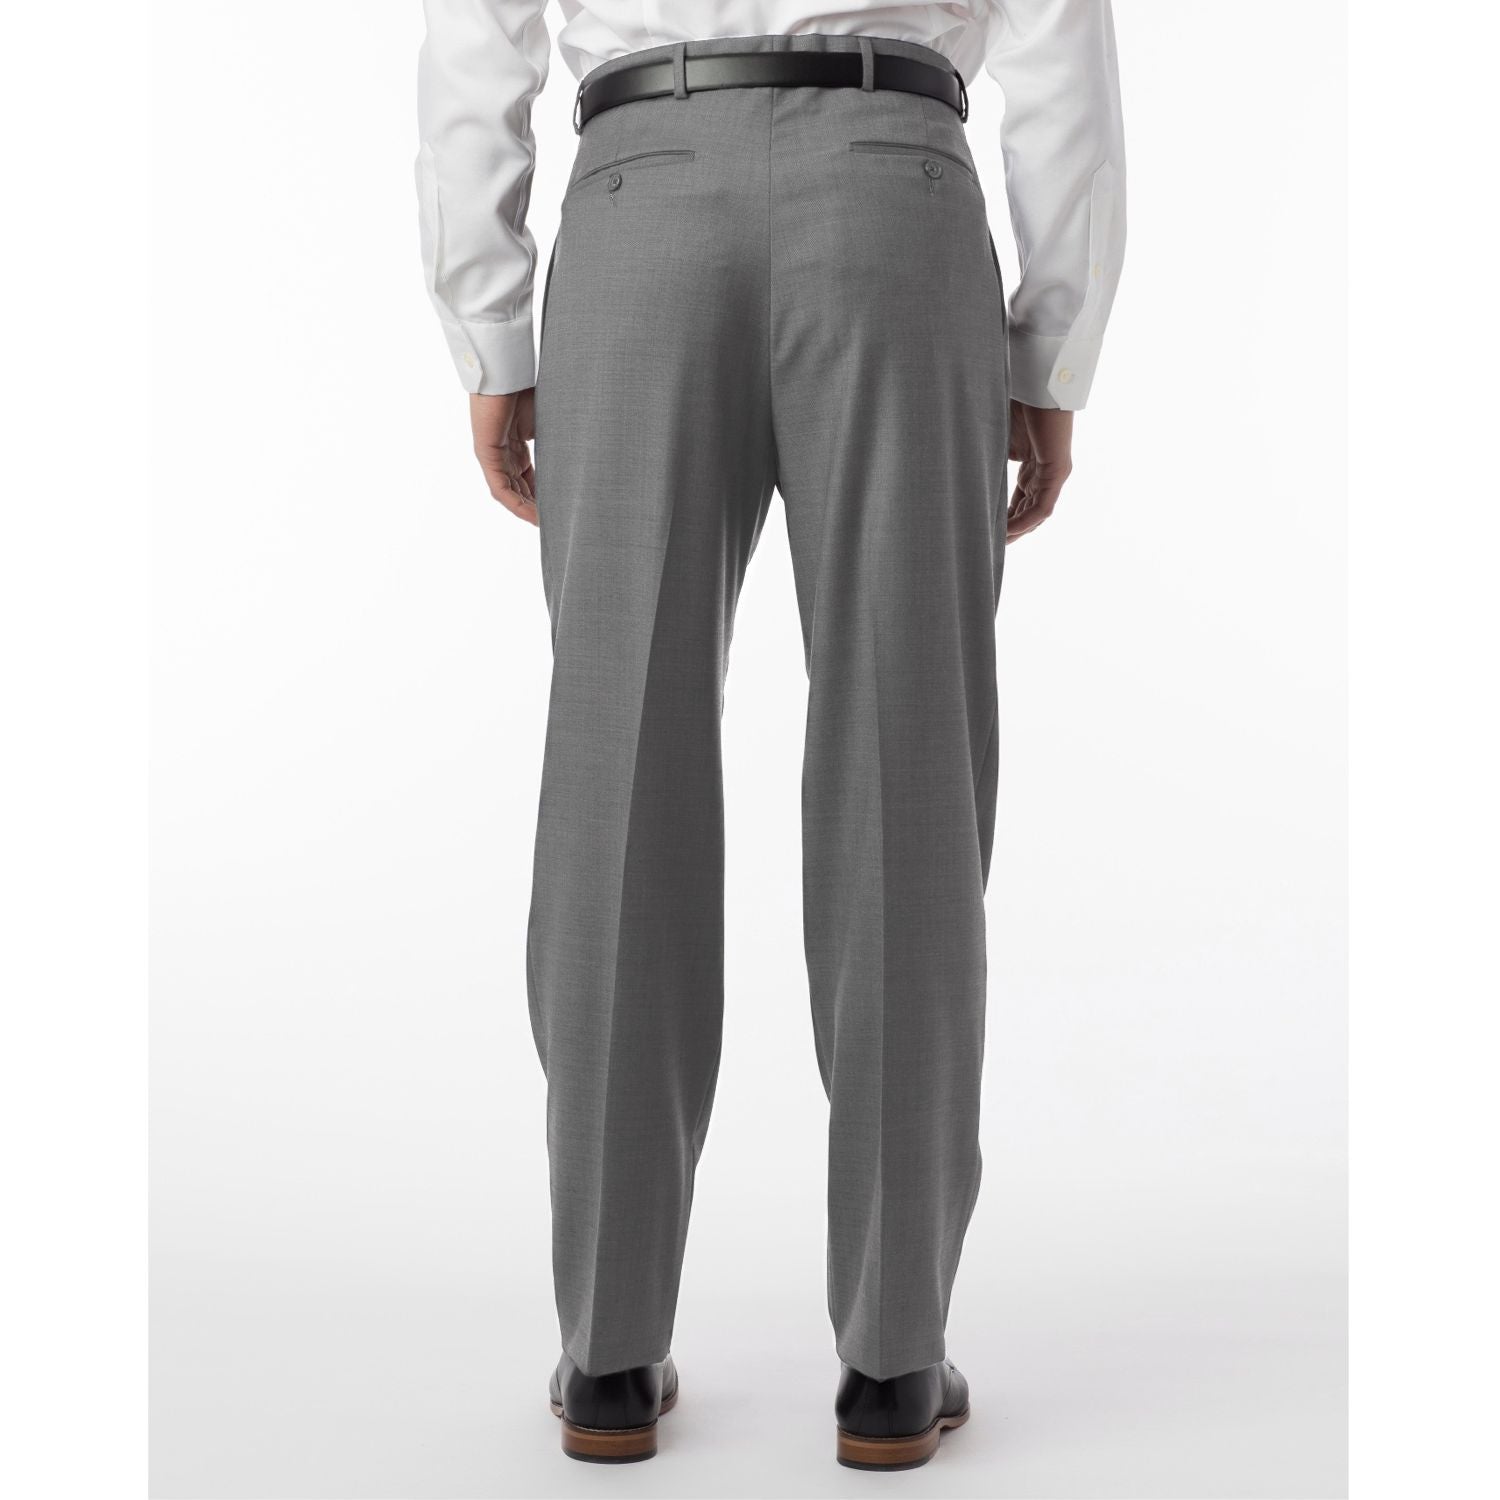 Super 120s Wool Travel Twill Comfort-EZE Trouser in Pearl Grey (Manchester Pleated Model) by Ballin